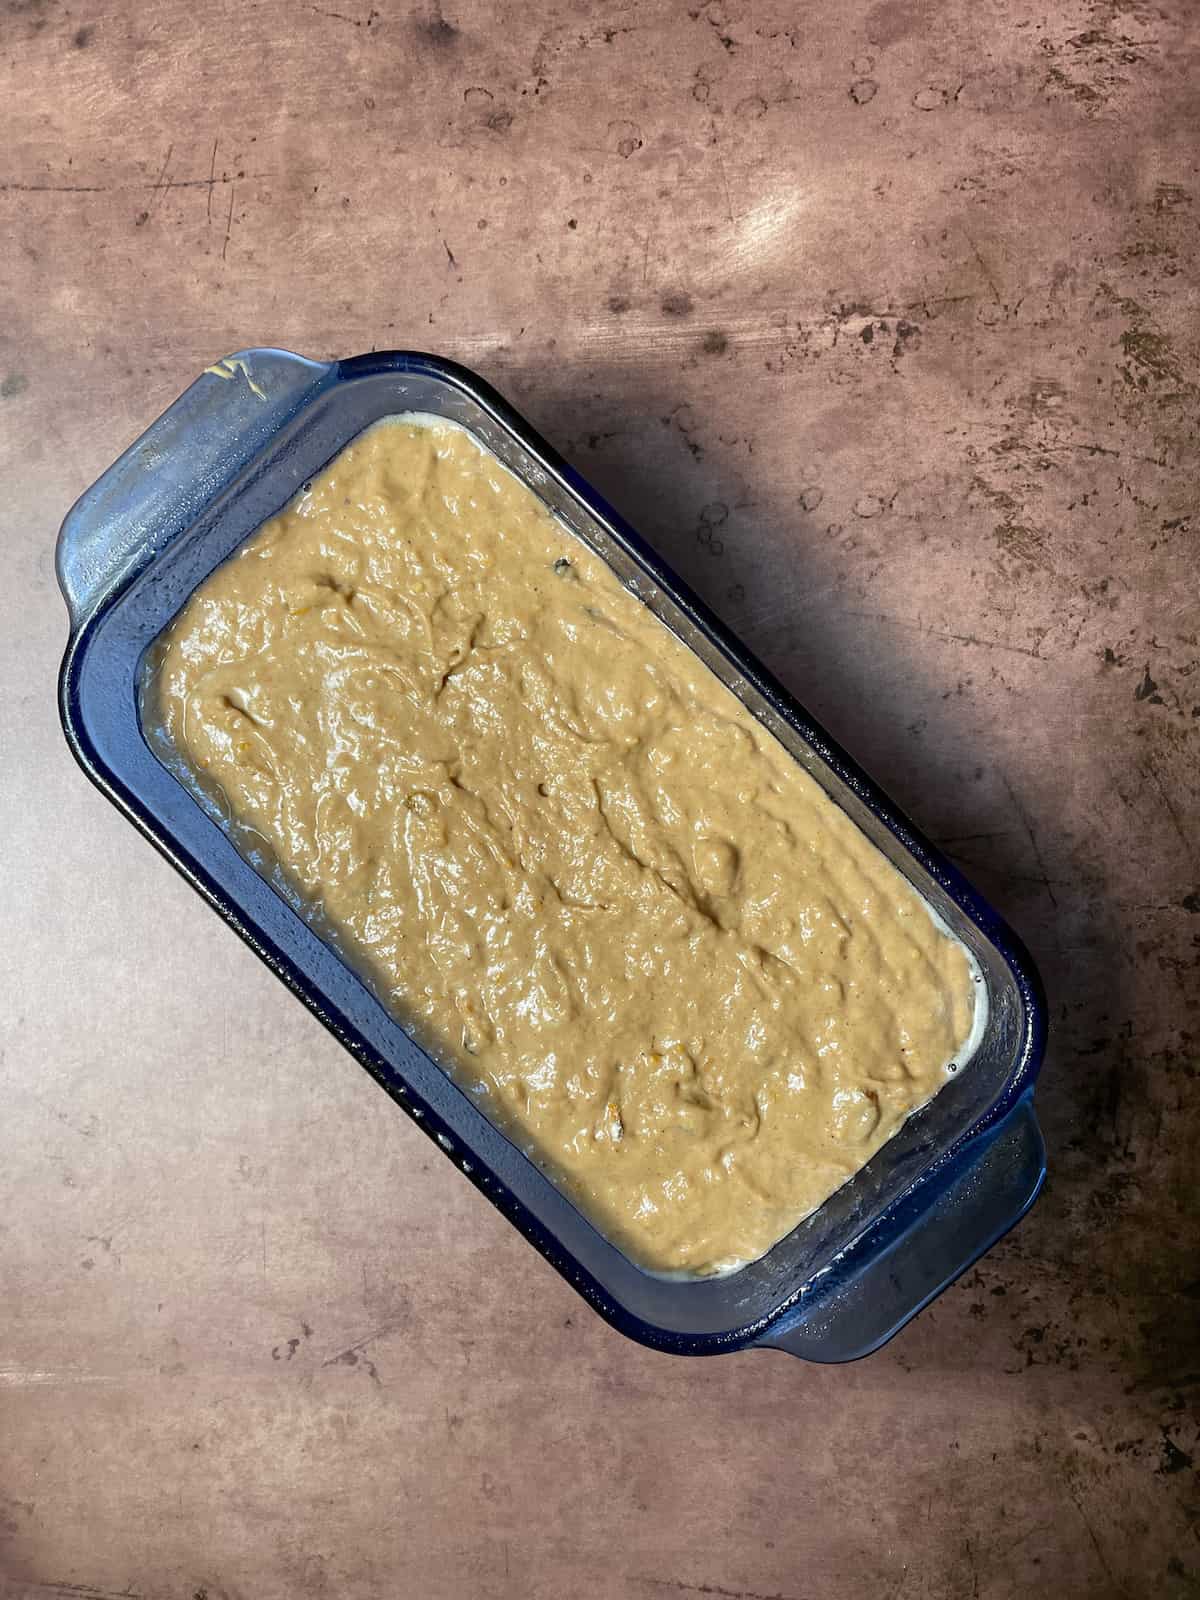 Spice bread batter in blue loaf pan on table.